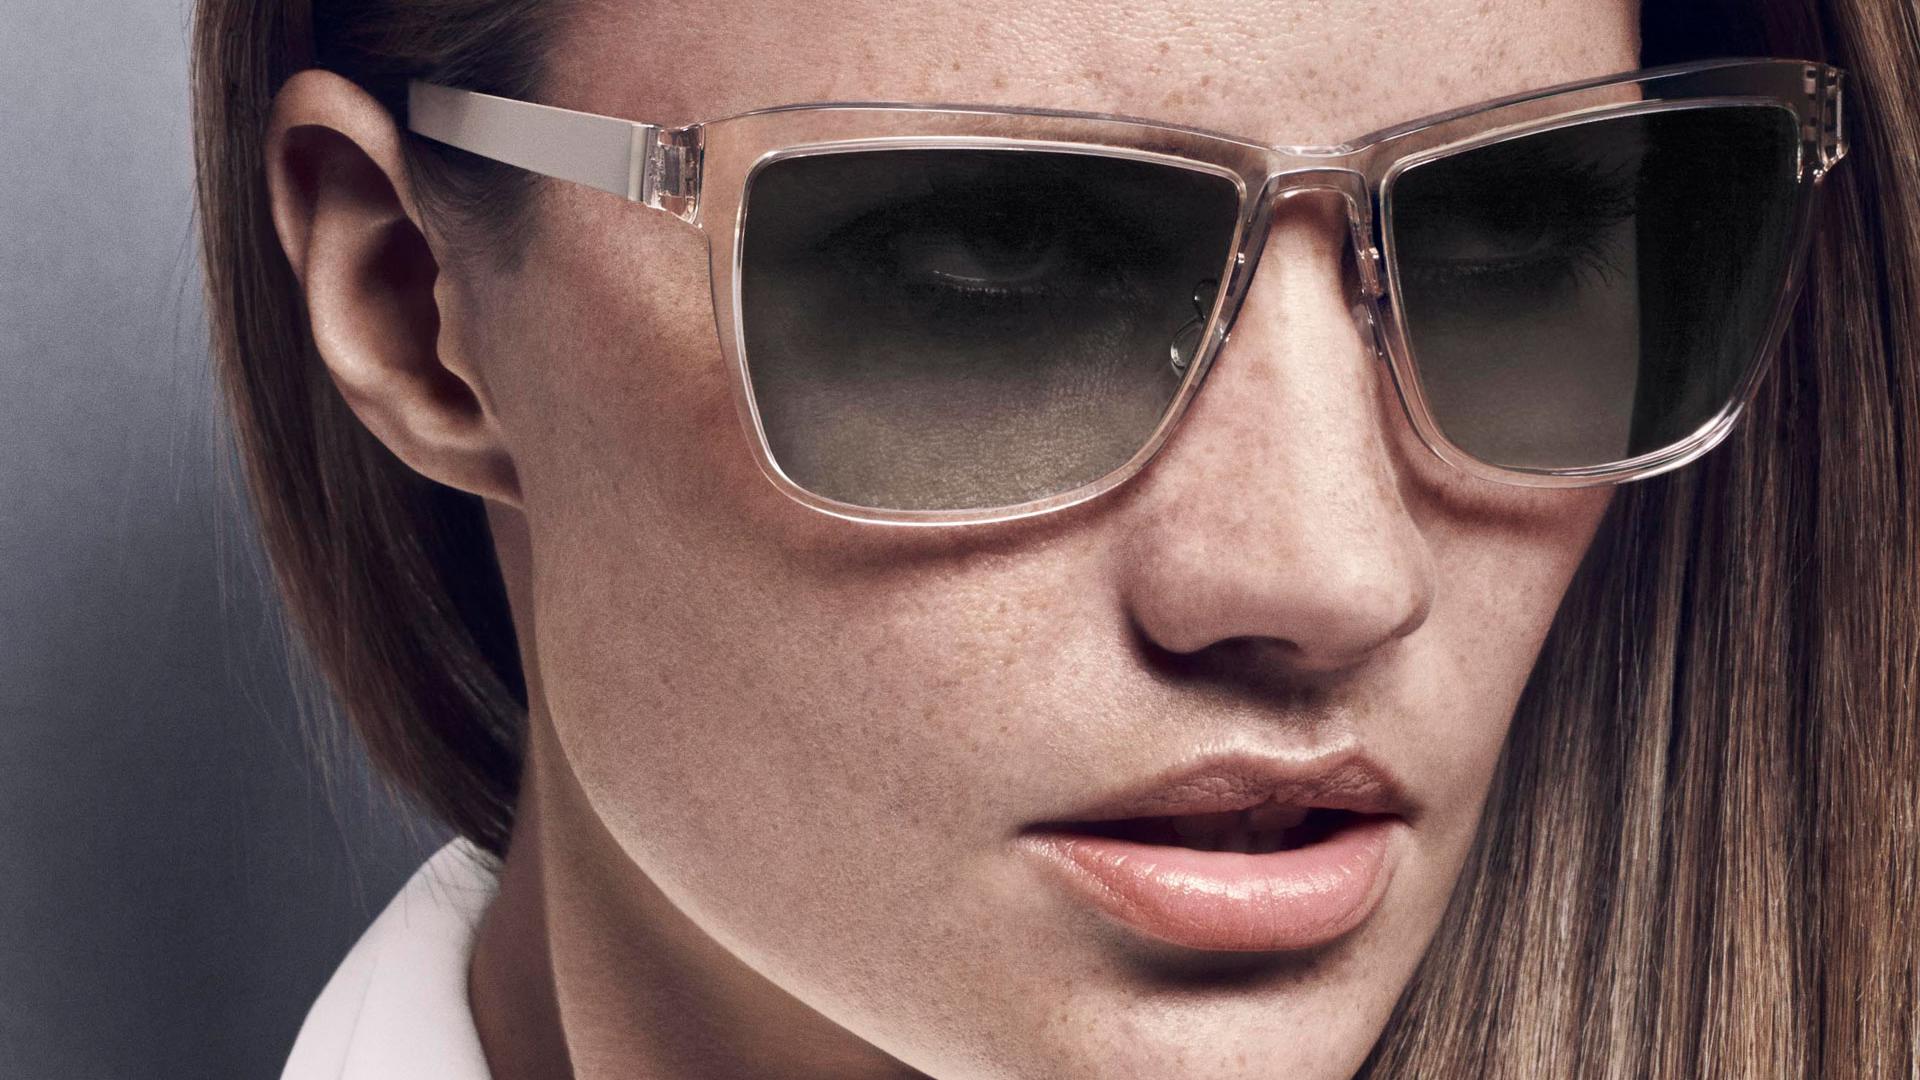 Simplicity and elegance: LINDBERG spectacle frames and ZEISS sunglass lenses - a summer hit